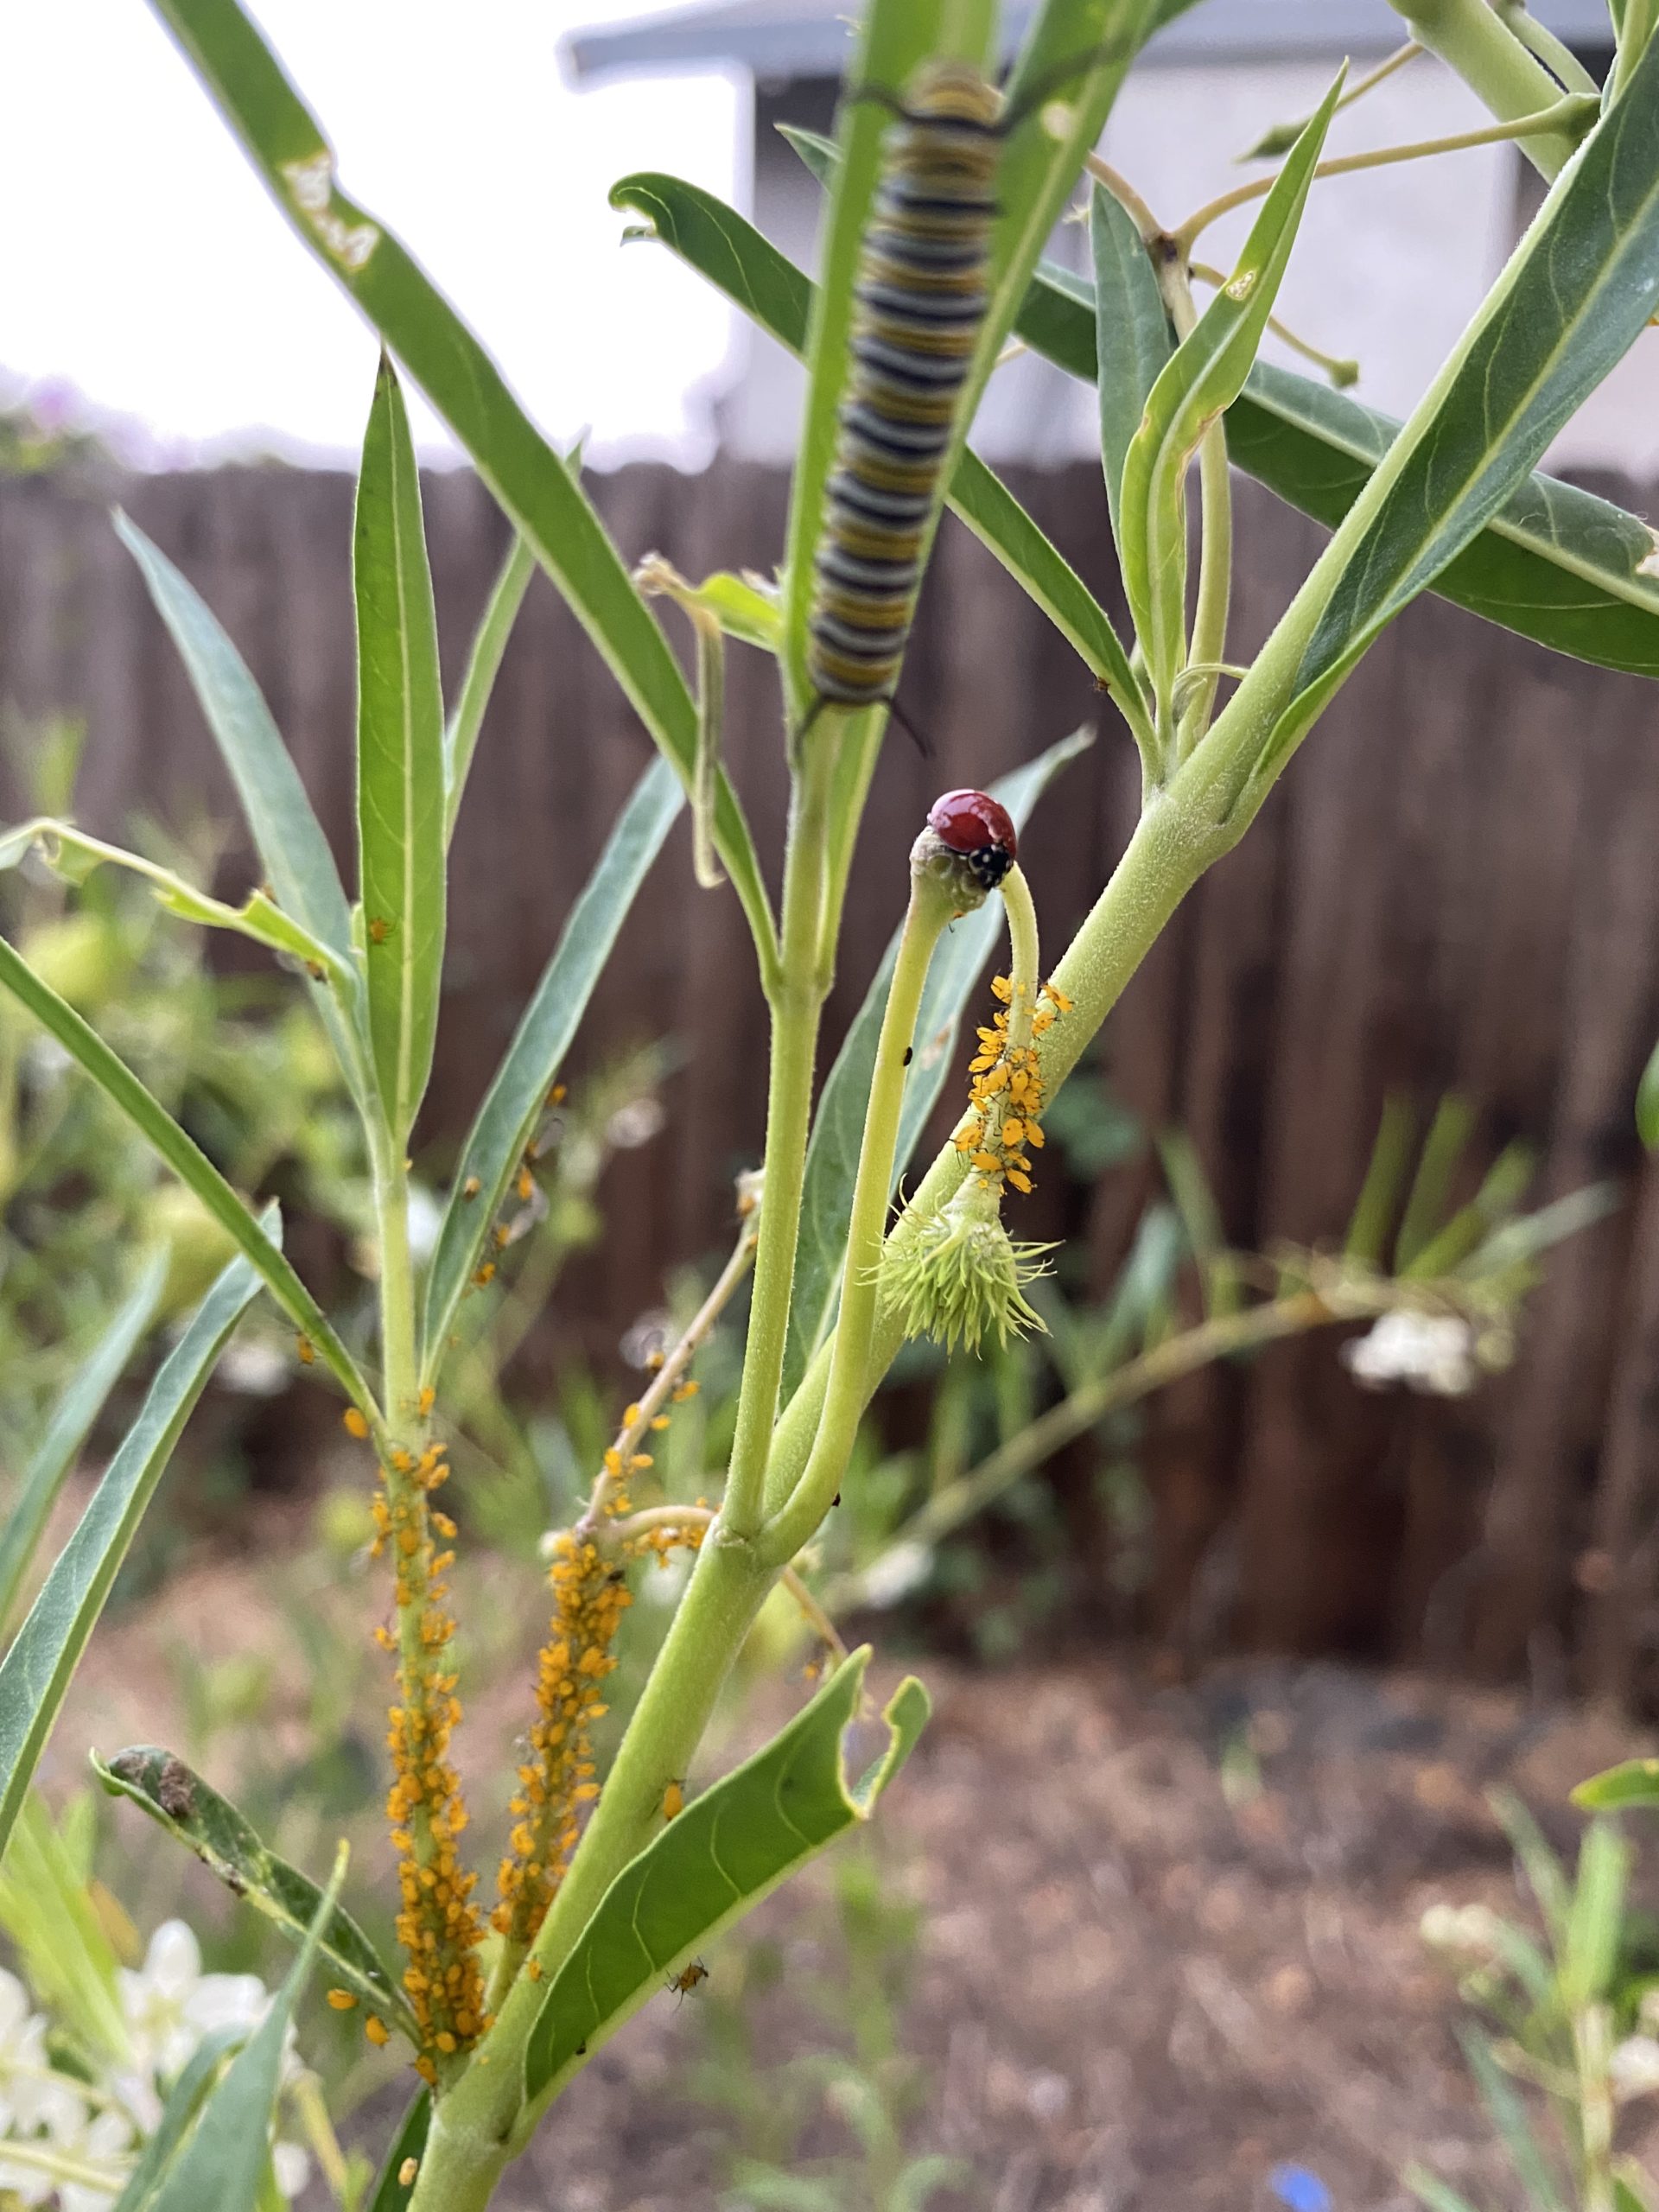 Aphid Wars! How to control these milkweed-infesting pests